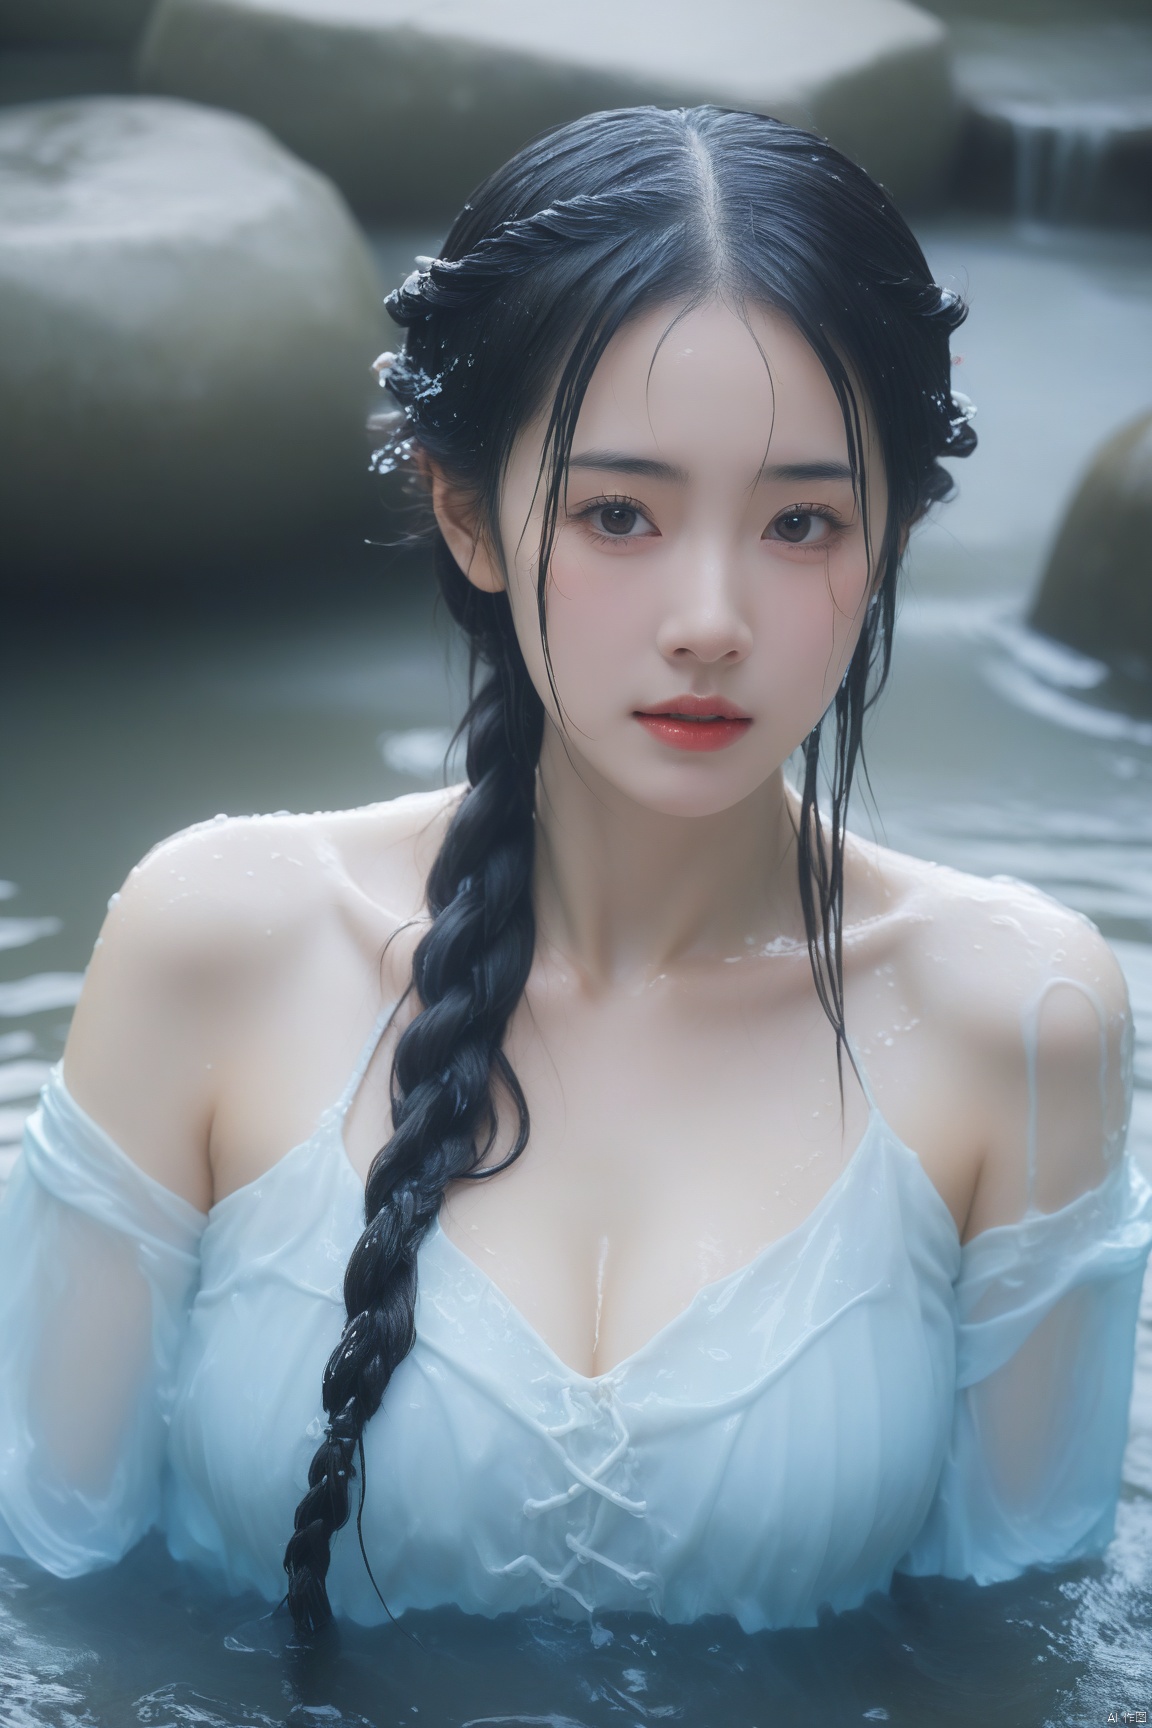  arien_hanfu,She is only forty-six years old, Getting wet, soaking through,A stunning young girl,gigantic breasts,dream,twin_braids,Wet hair,she hair is soaked through,crying,milk on face,Hair_dripping,face_dripping, MAJICMIX STYLE